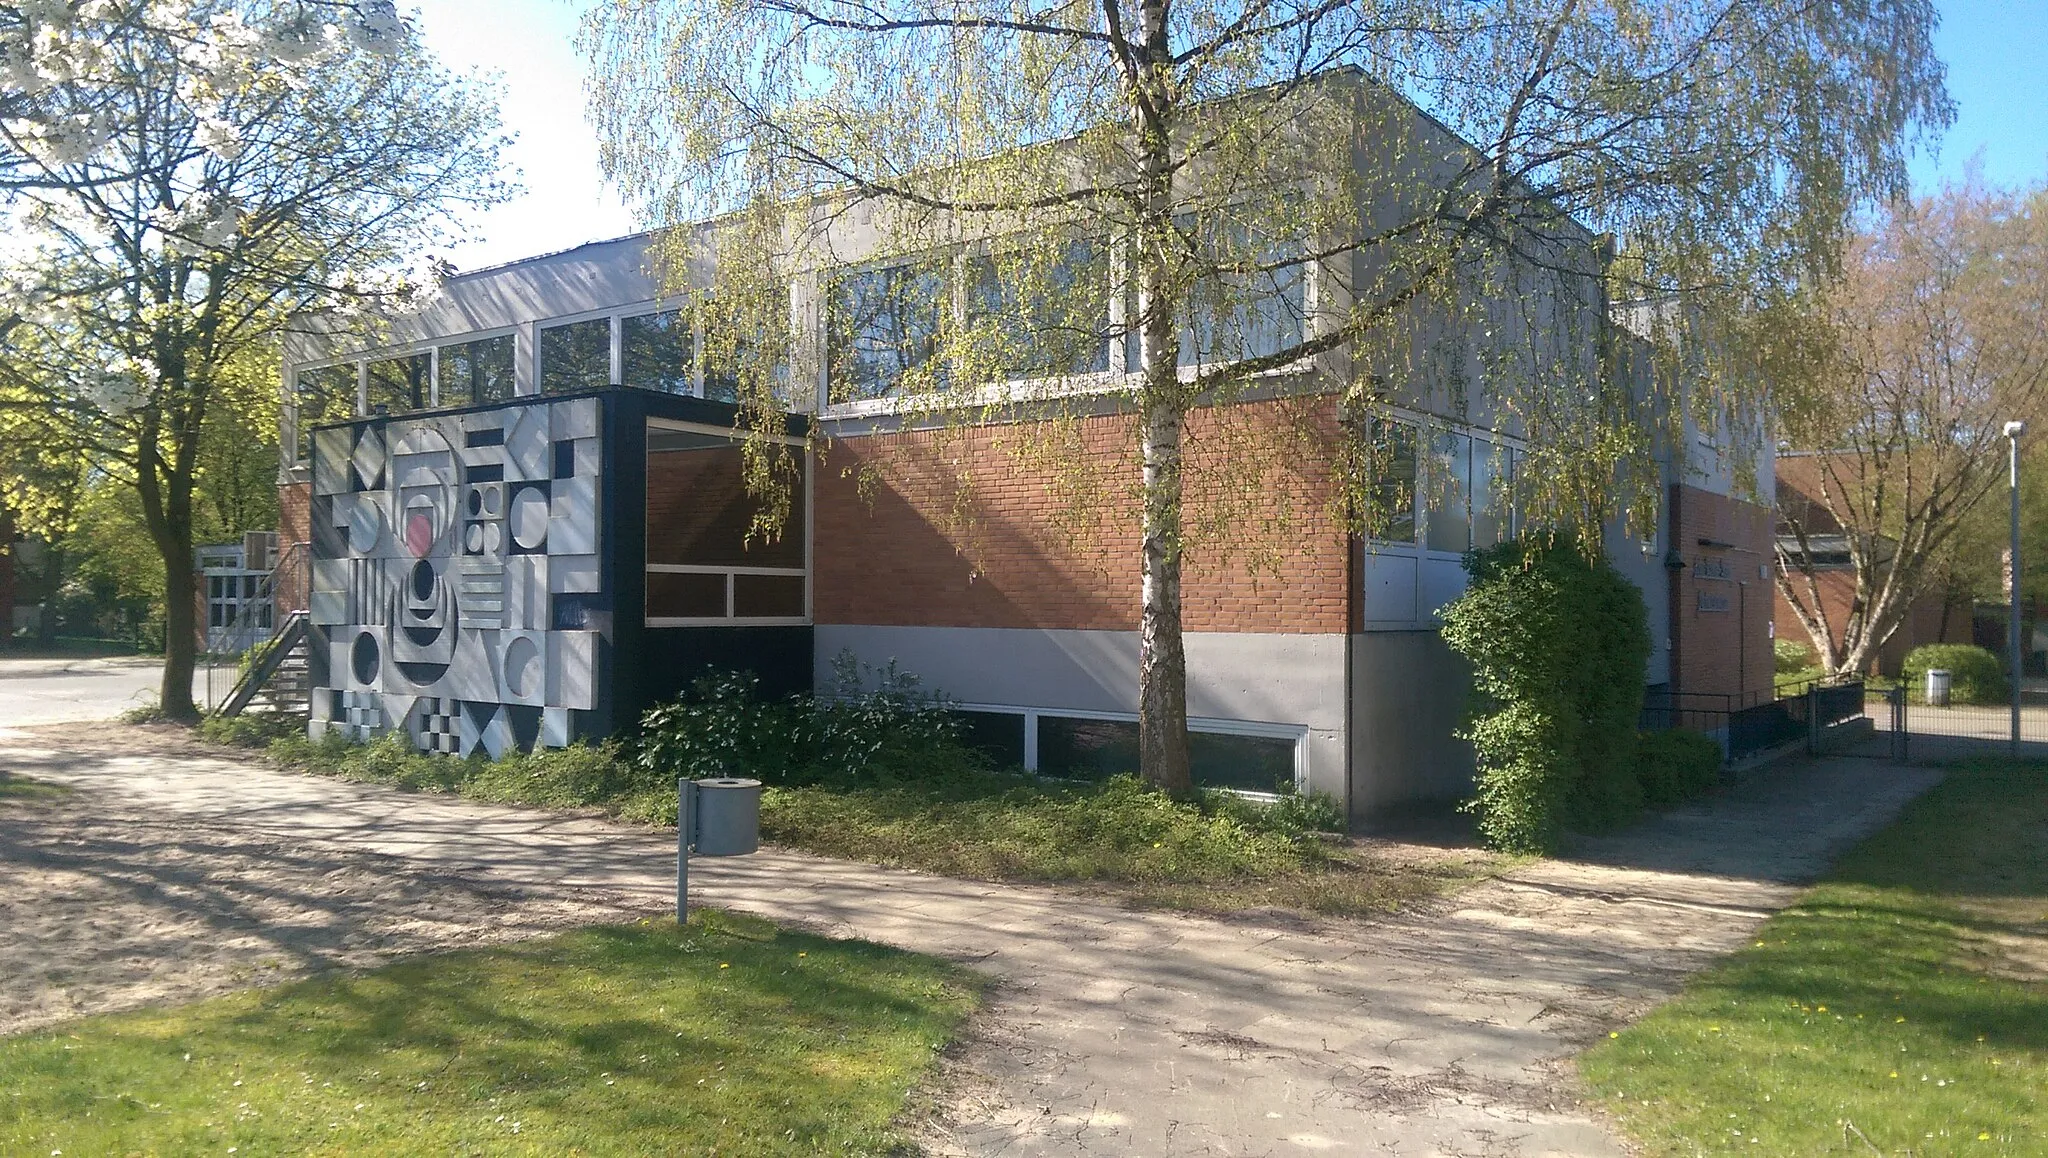 Photo showing: Northern view of the school "Fritz-Reuter" in Ahrensburg , Ahrensburg municipality , Stormarn district, Schleswig-Holstein state, Germany.